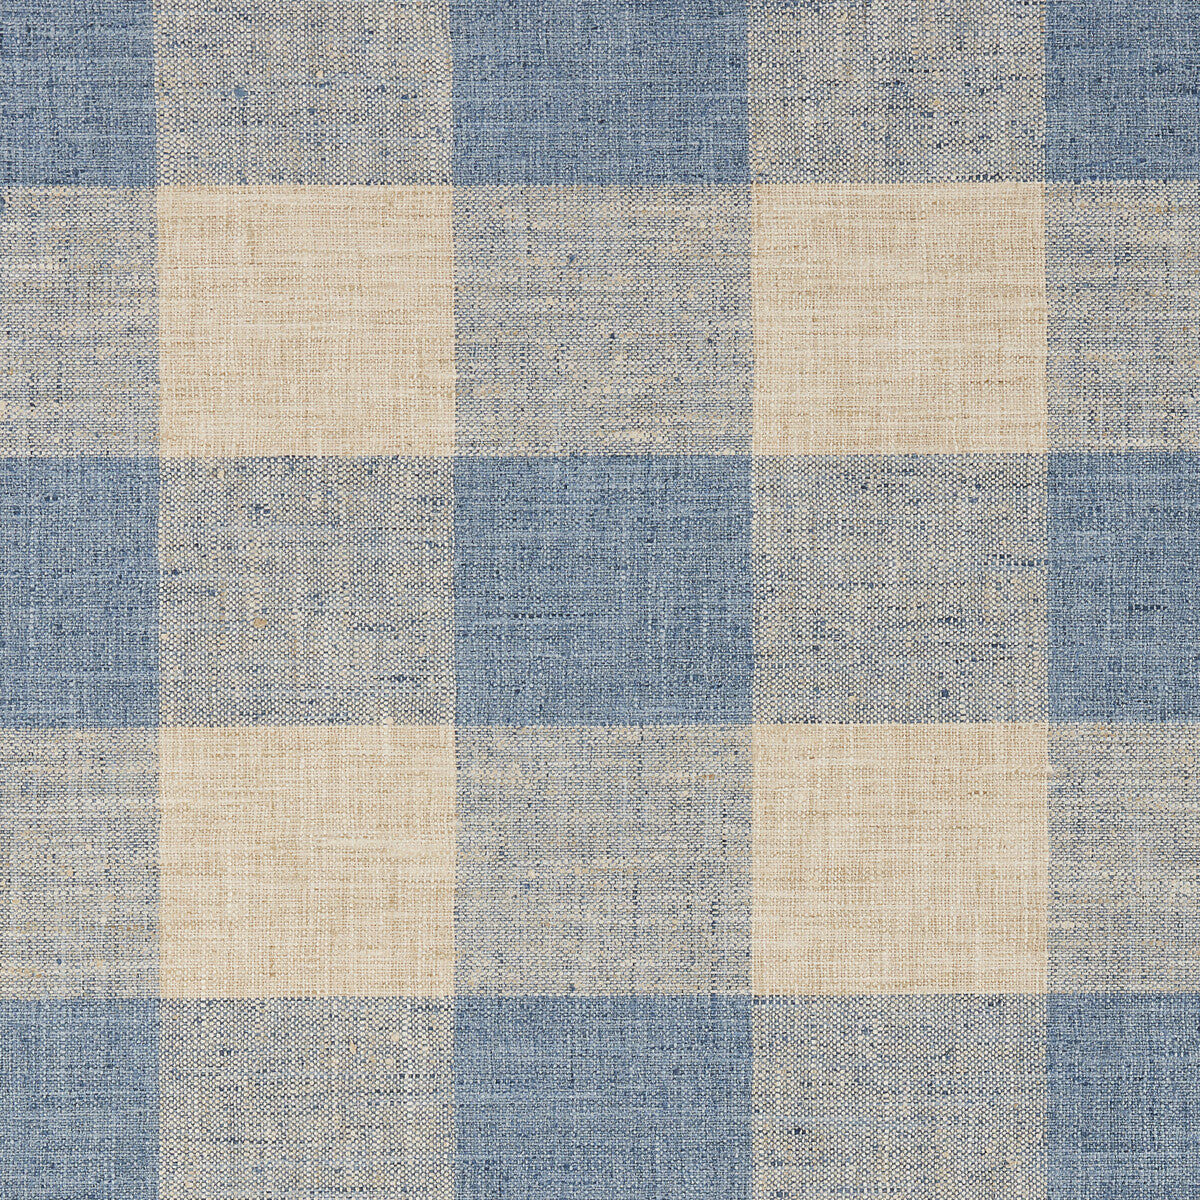 Kravet Basics fabric in 34090-1615 color - pattern 34090.1615.0 - by Kravet Basics in the Bungalow Chic II collection